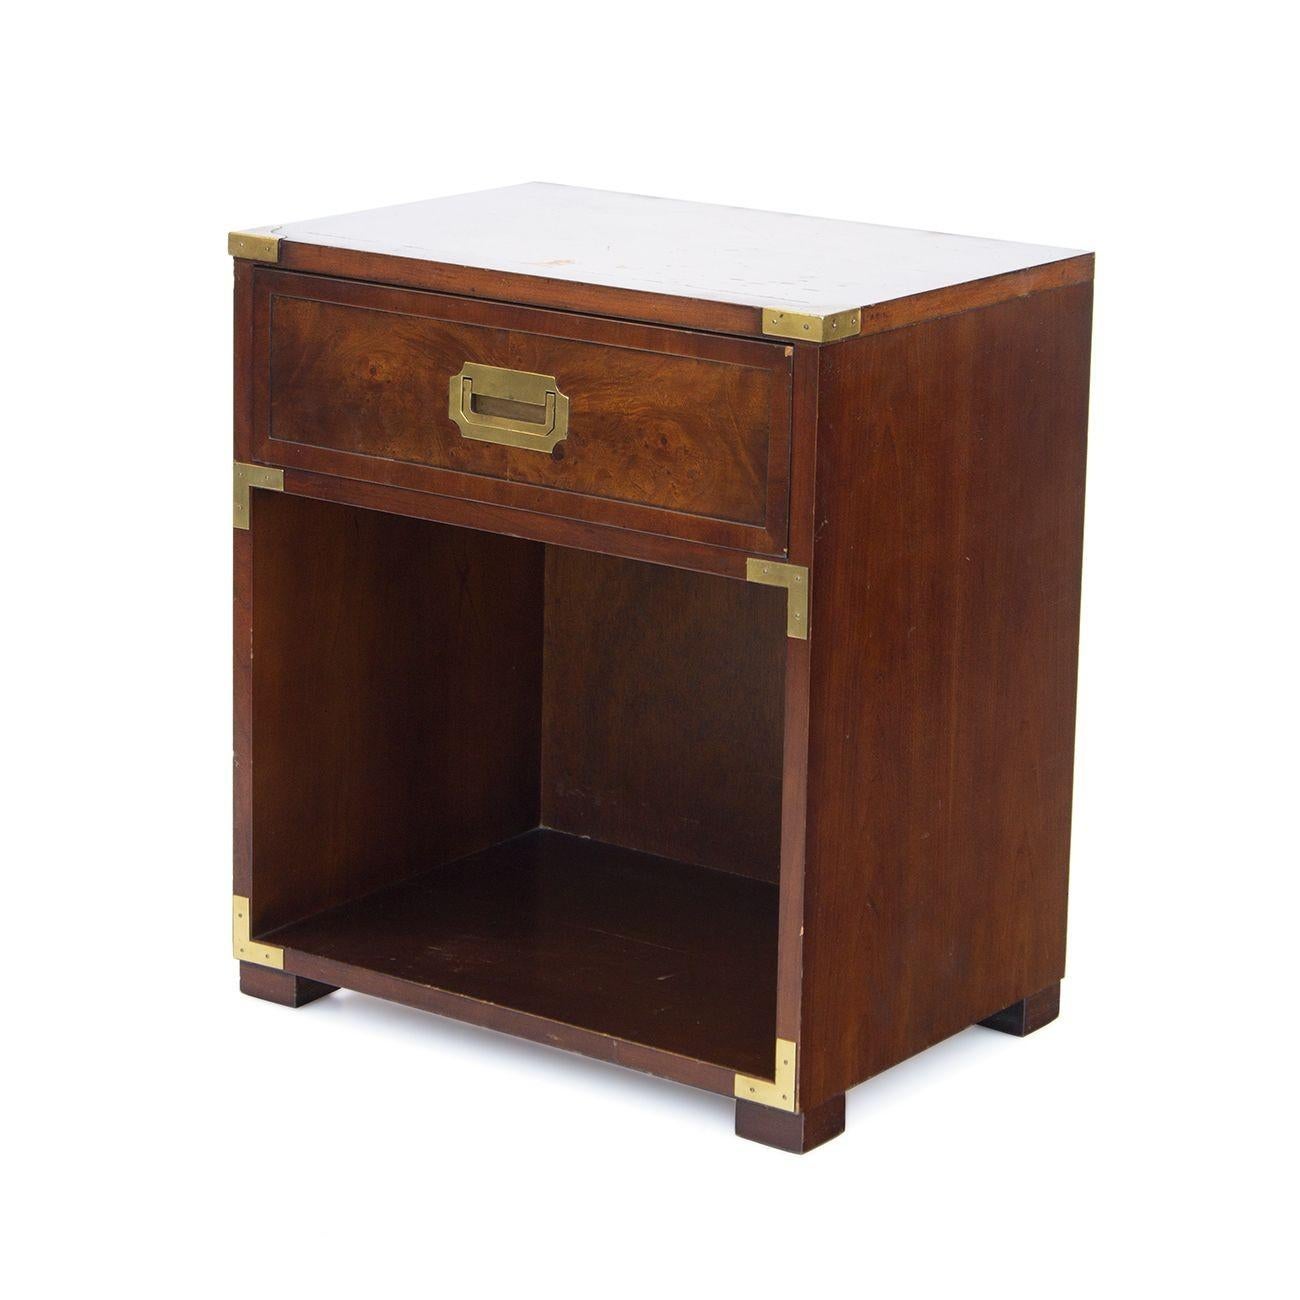 USA, 1970s
Burlwood campaign nightstand made by Hekman. Single drawer for storage, brass campaign hardware, quality solid core construction with luxurious burlwood. 
CONDITION NOTES: Top finish has wear as pictured- areas where the lacquer finish